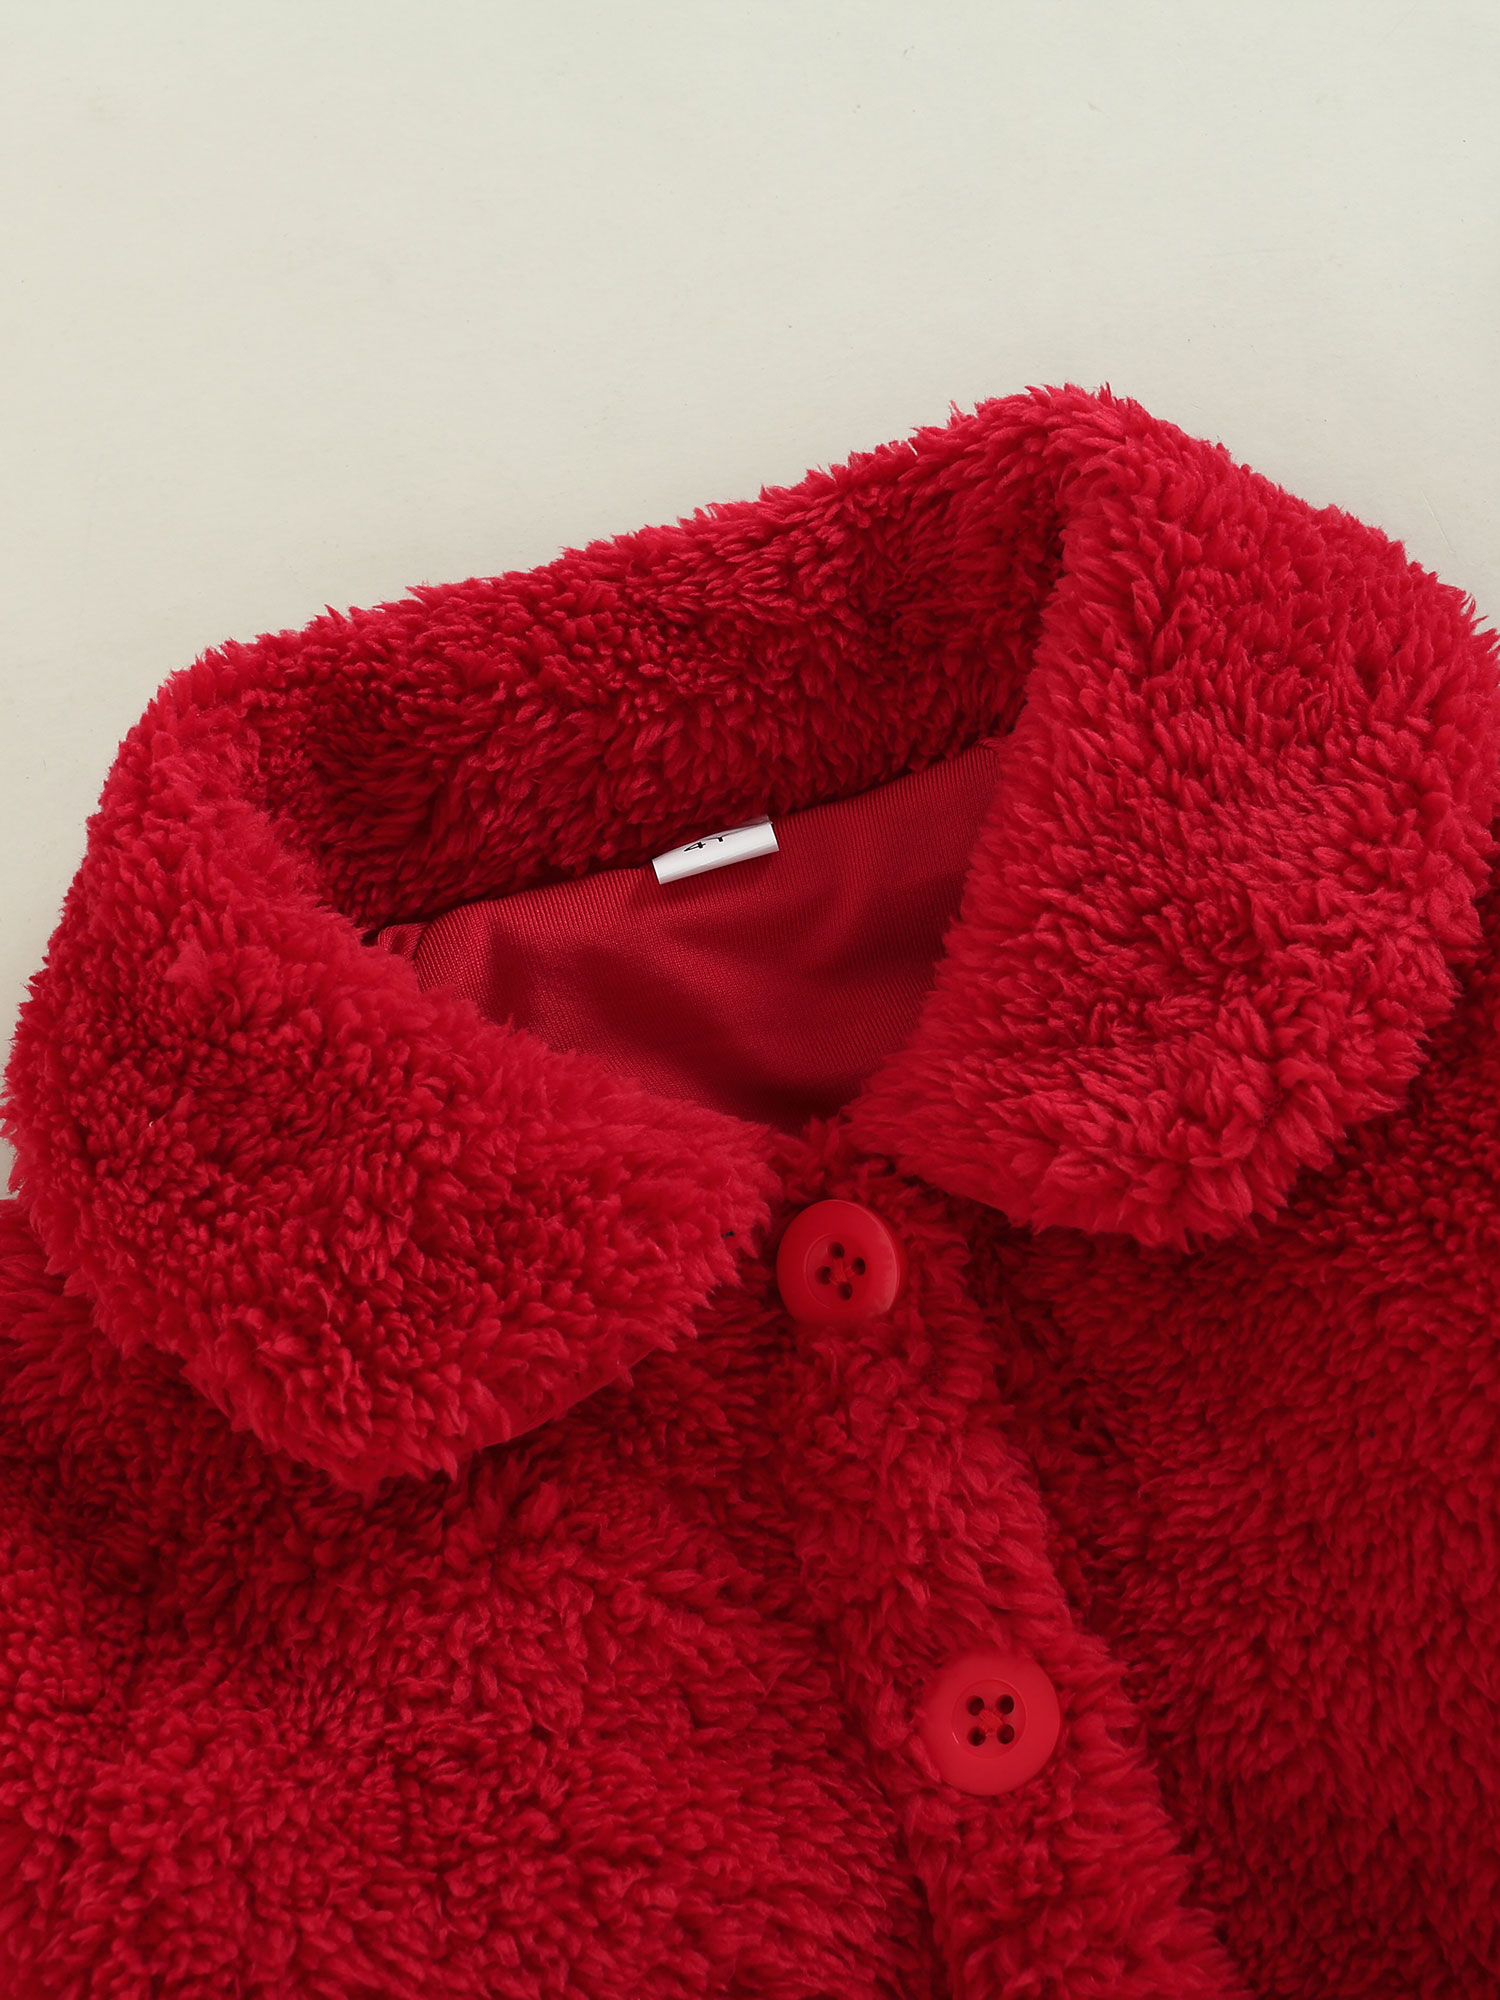 Licupiee Infant Newborn Baby Girl Plush Coat Warm Lapel Long Sleeve Button Down Red Plush Jacket Fall Winter Outwear - image 4 of 6